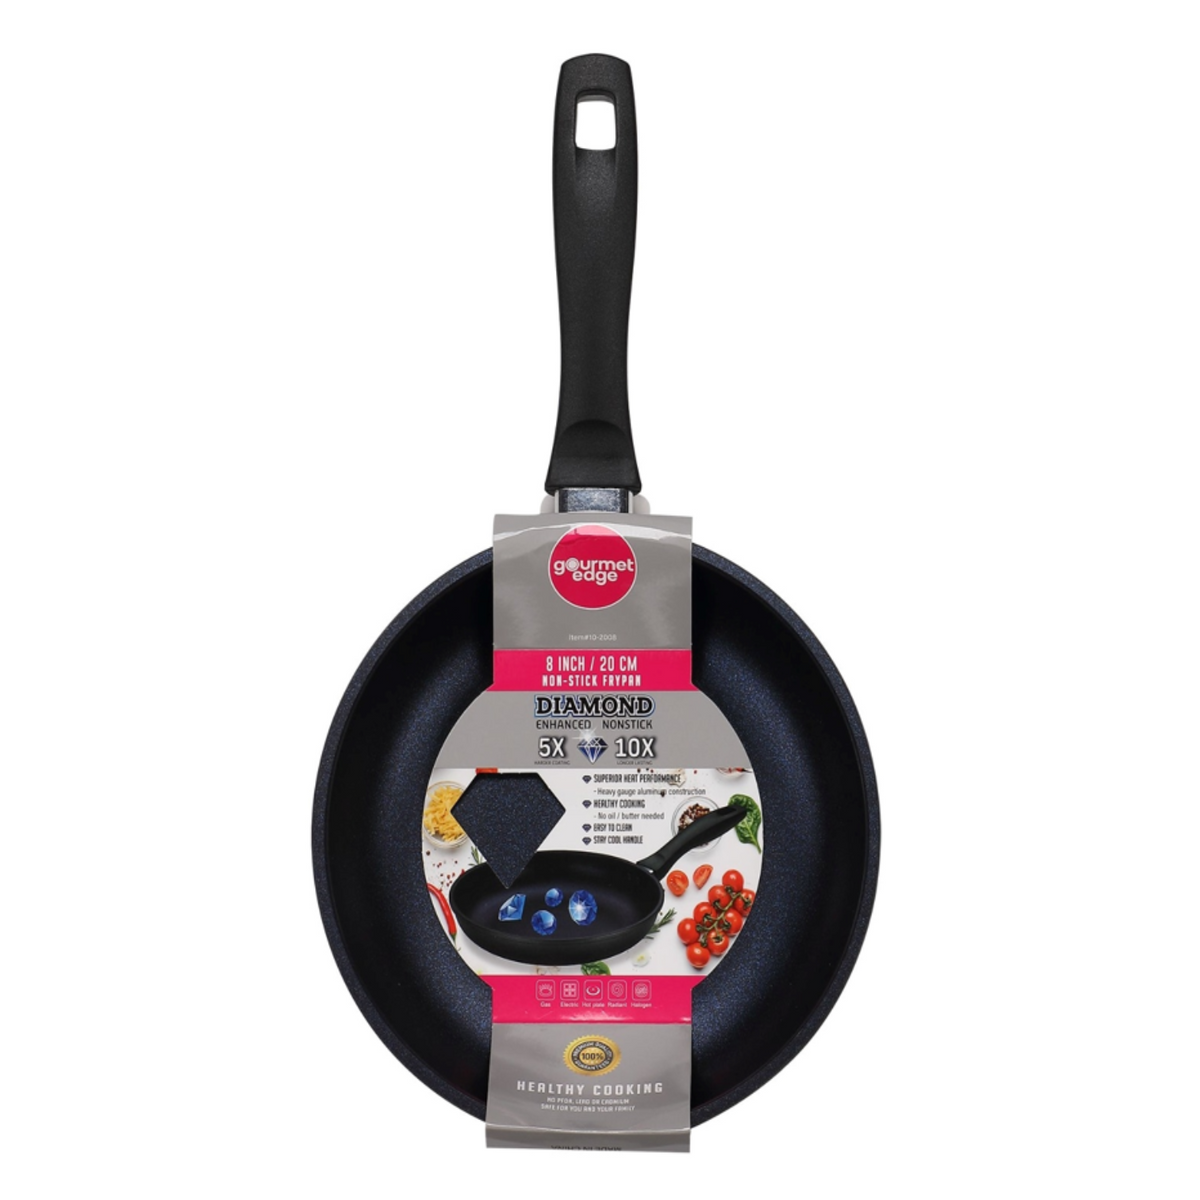 Gourmet Edge 8-inch Diamond Infused Nonstick Frypan 2-pack - 20164621